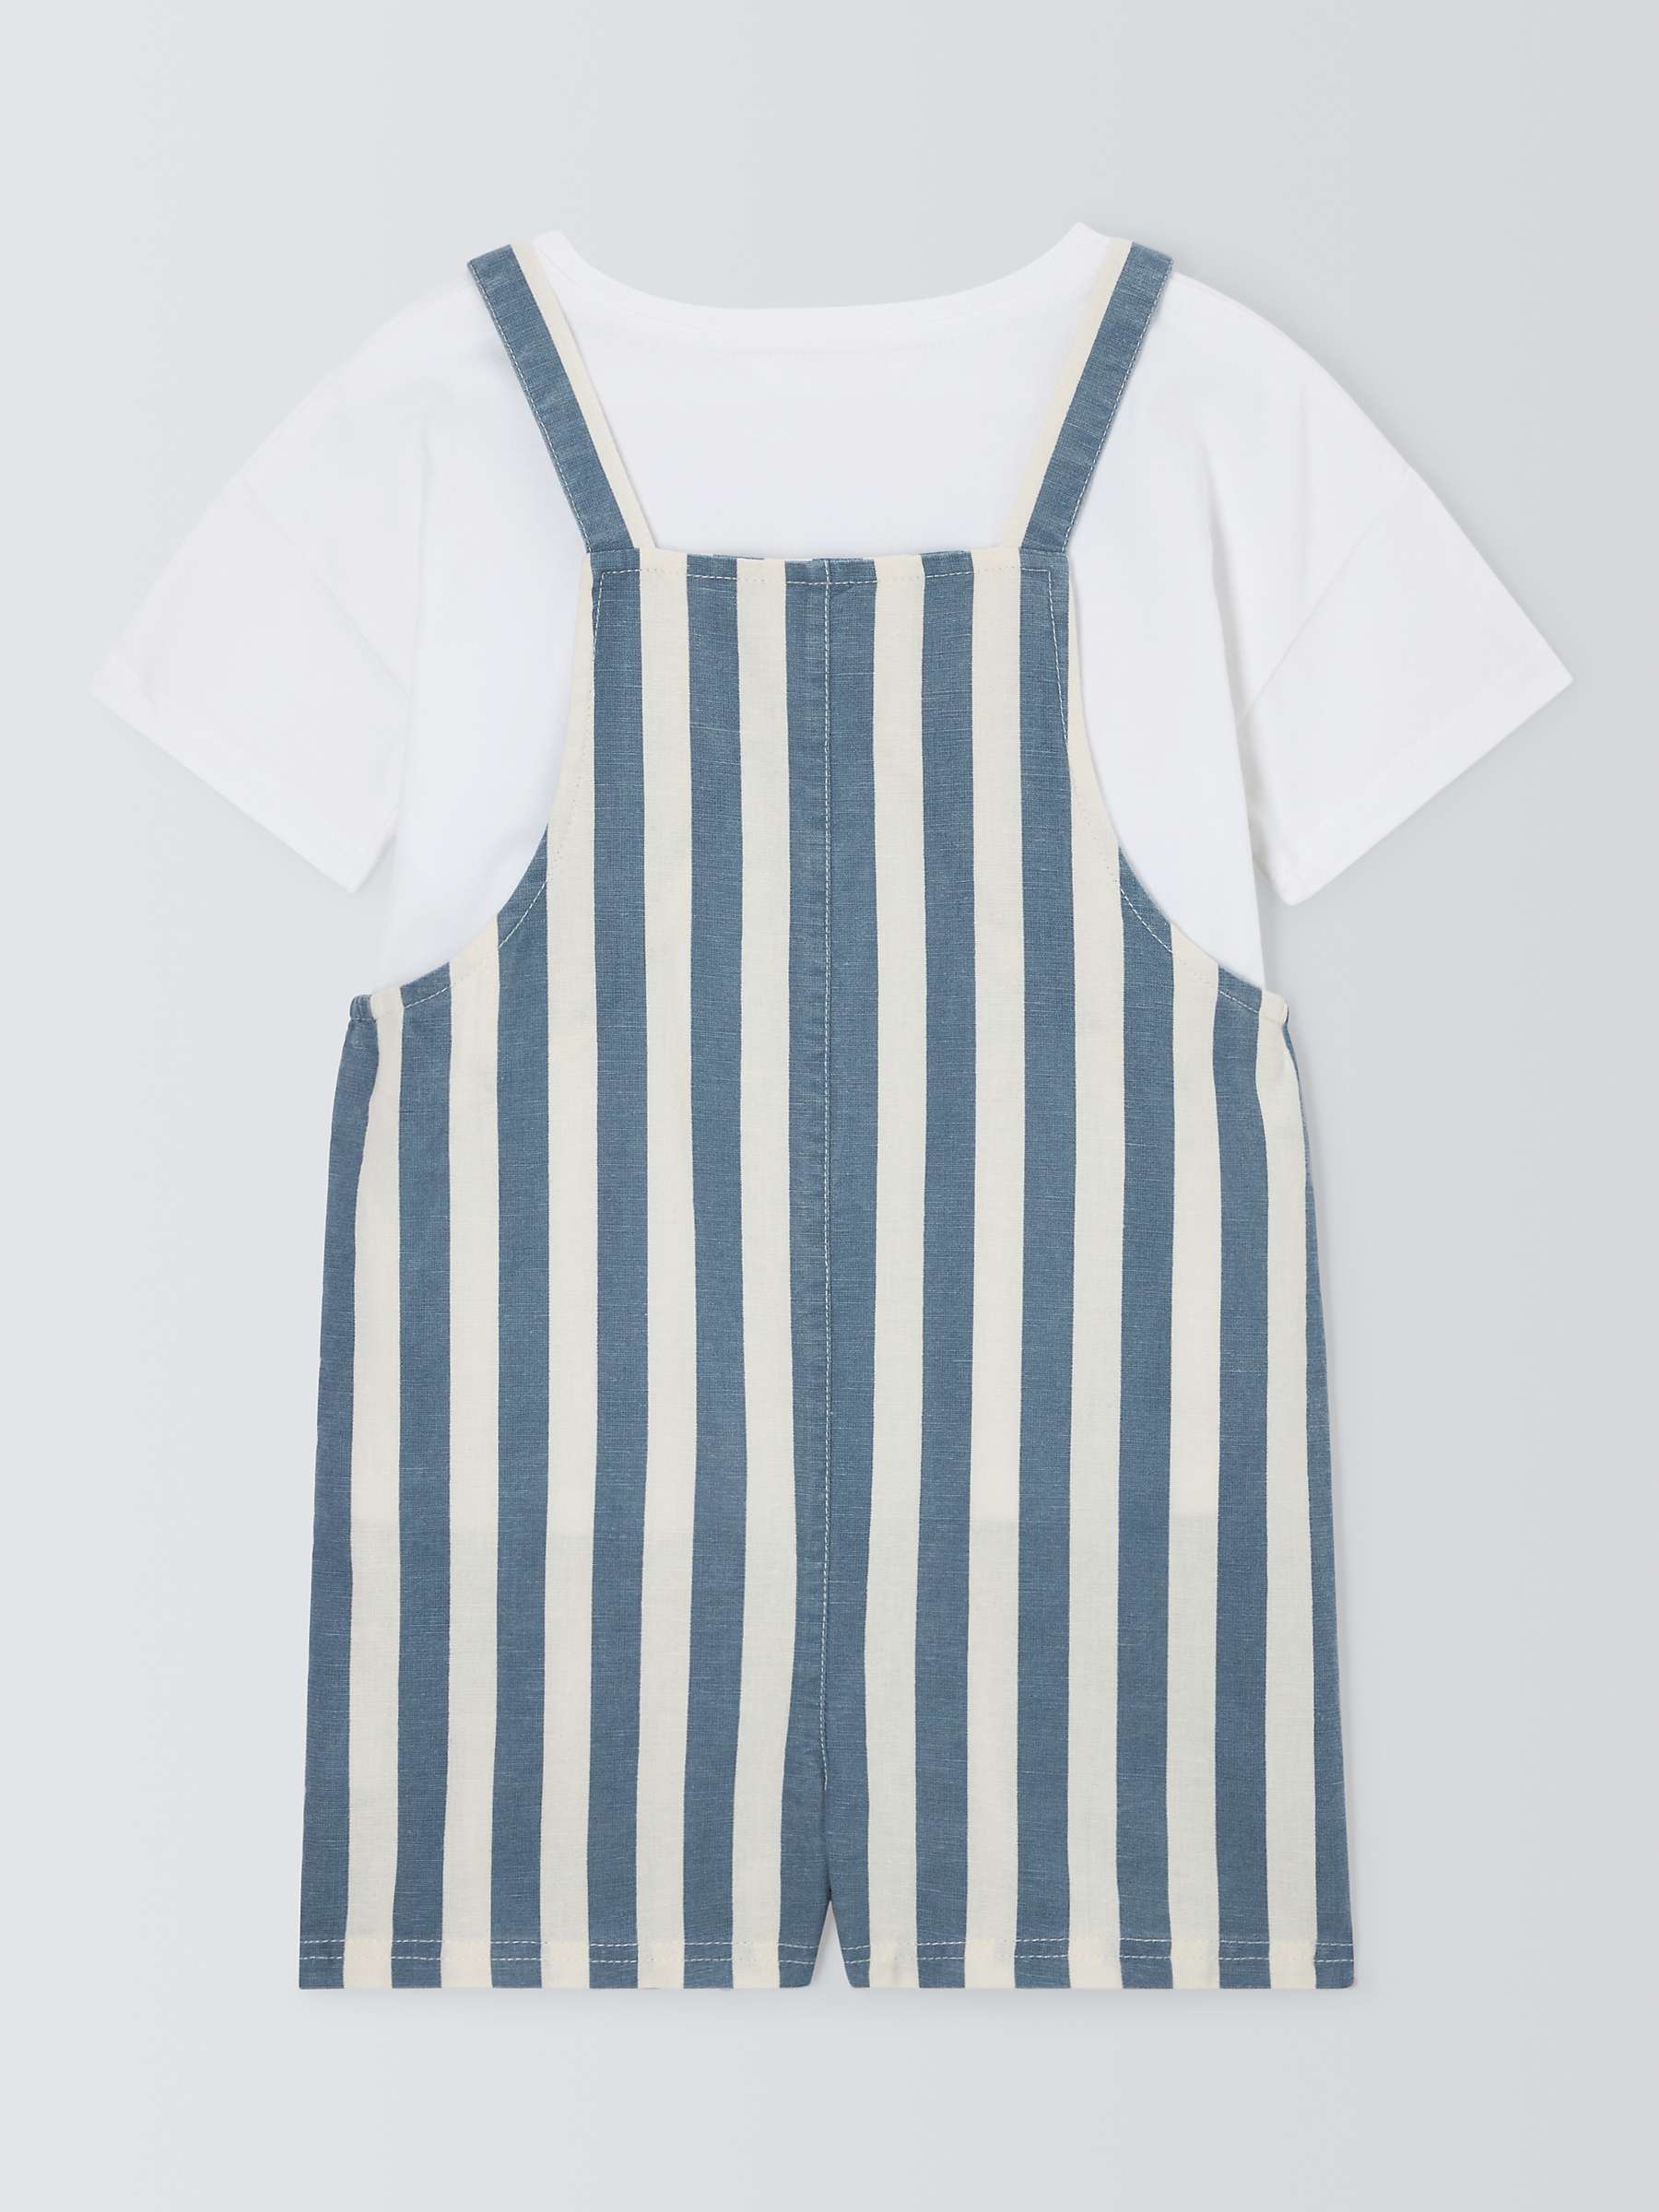 Buy John Lewis ANYDAY Baby Cotton T-Shirt and Linen Blend Stripe Dungarees Online at johnlewis.com